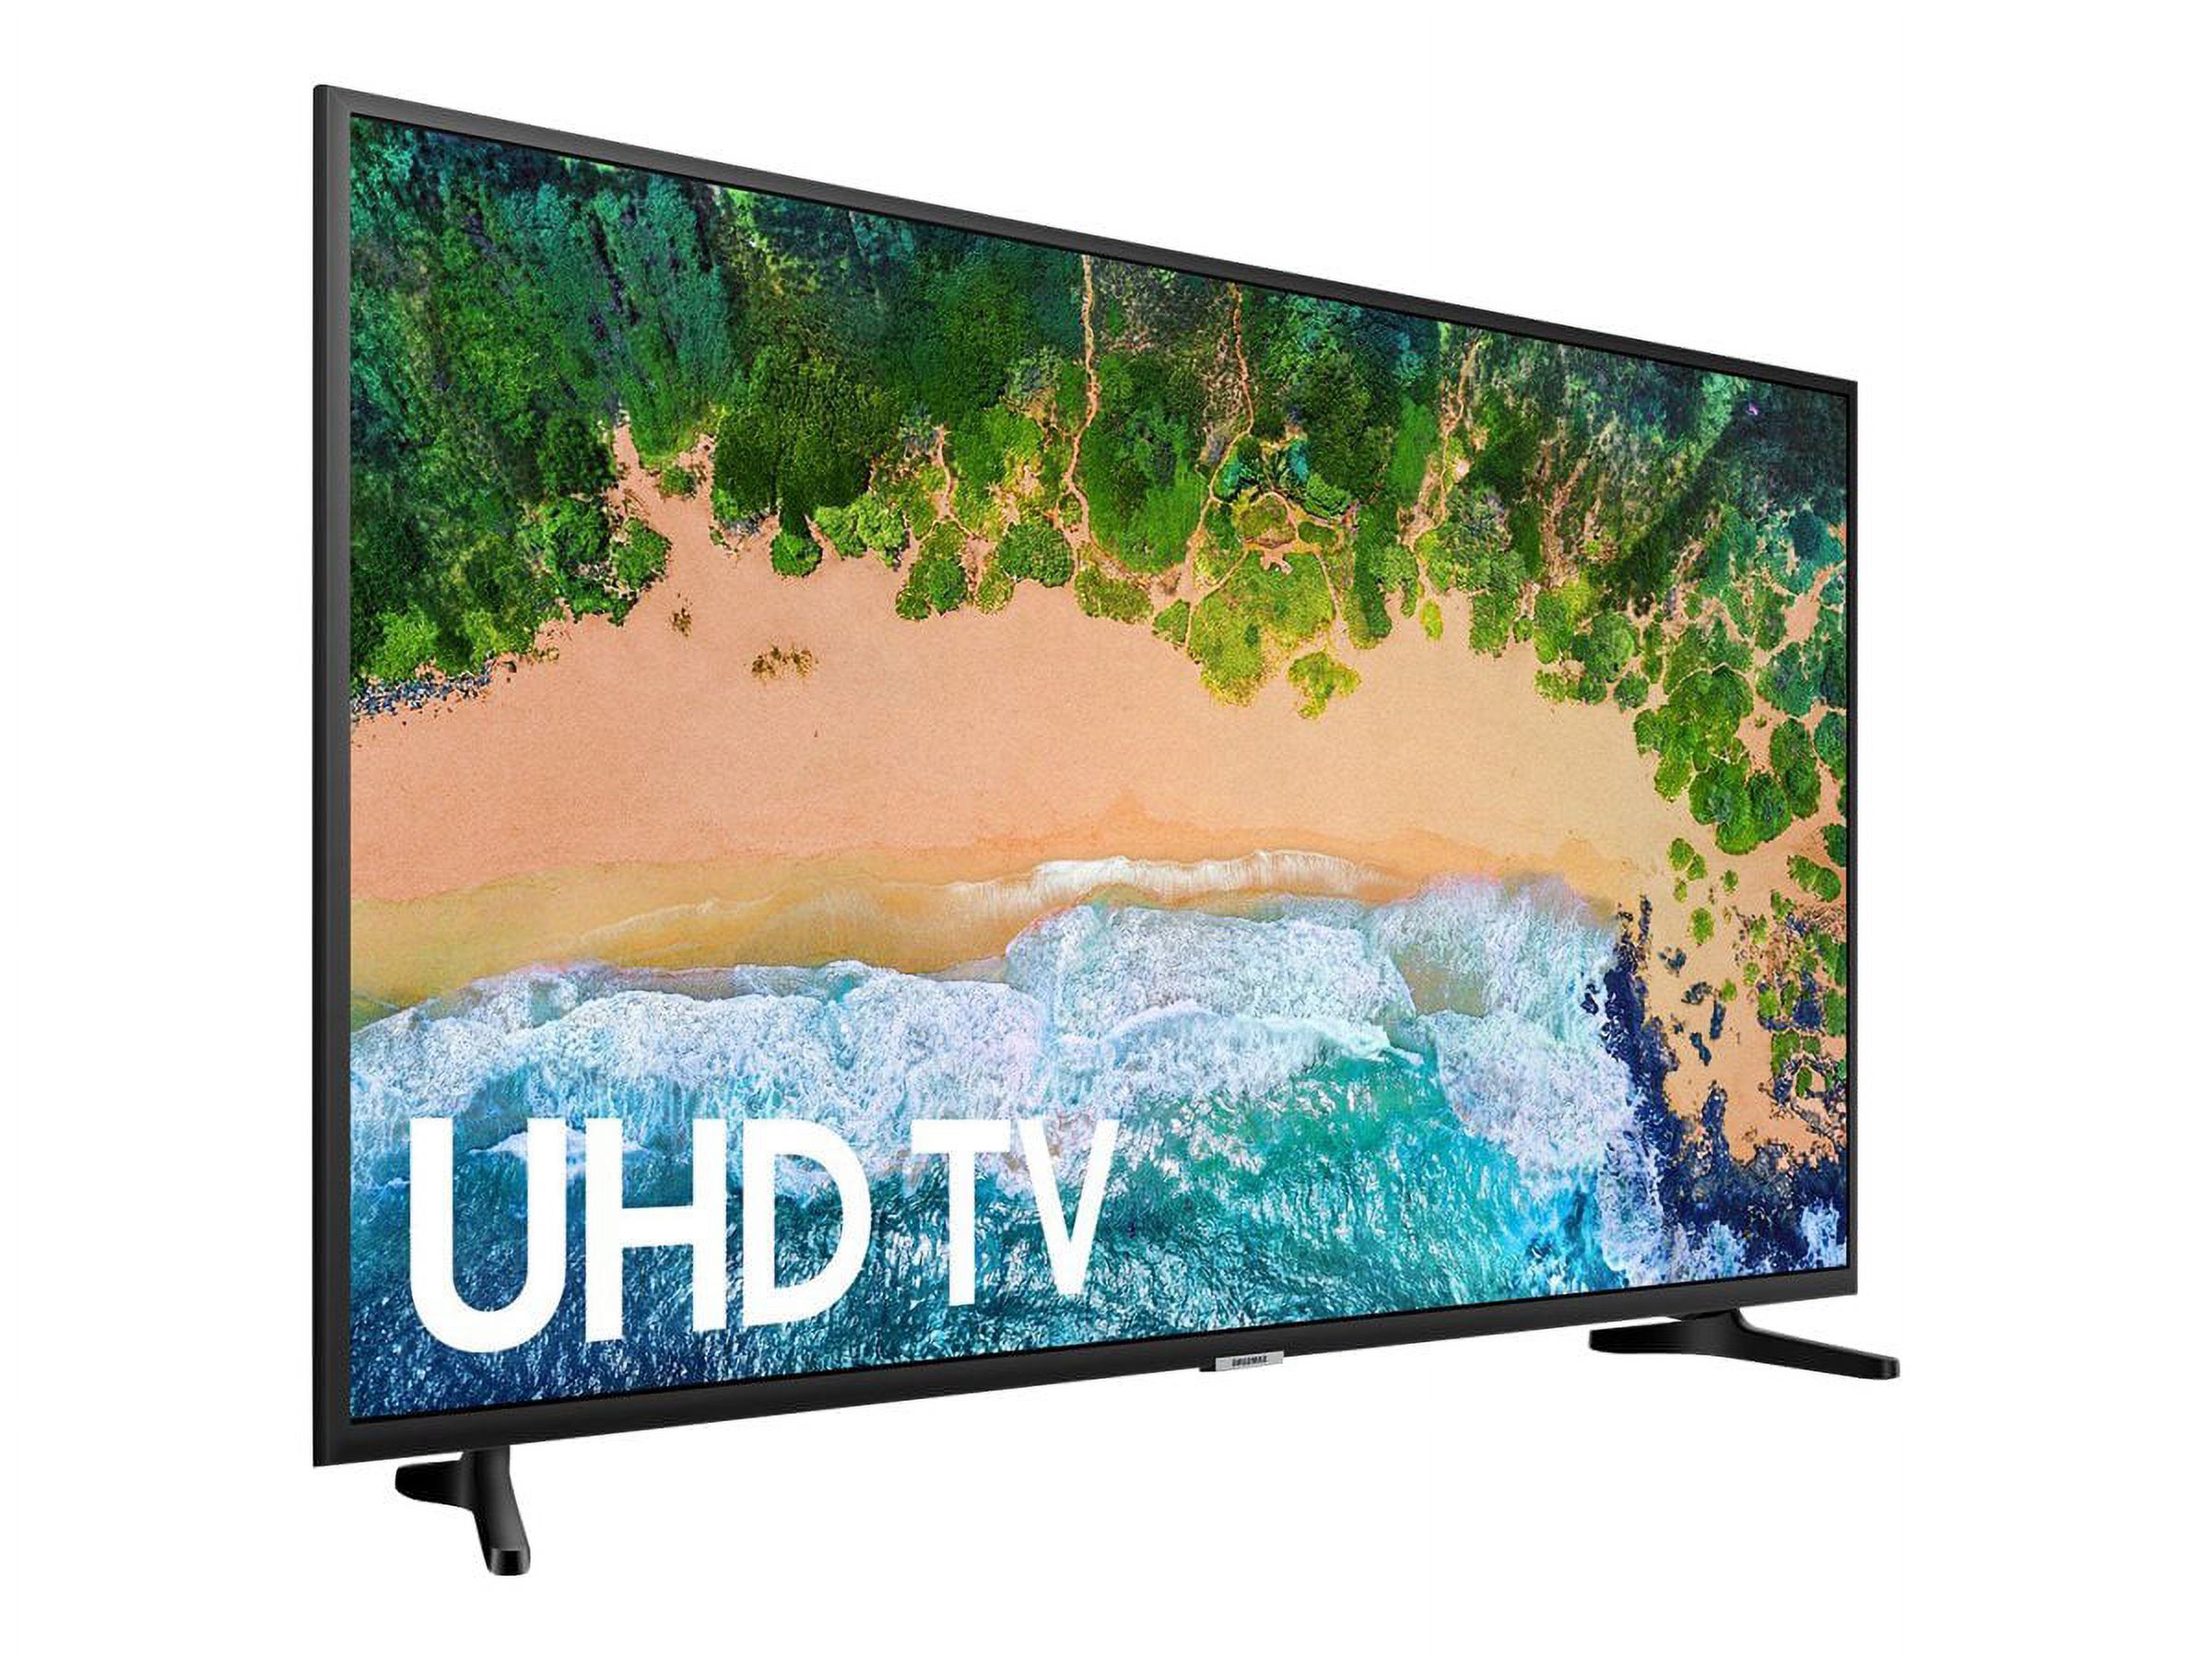 SAMSUNG 50" Class 4K UHD 2160p LED Smart TV with HDR UN50NU6900 - image 5 of 6